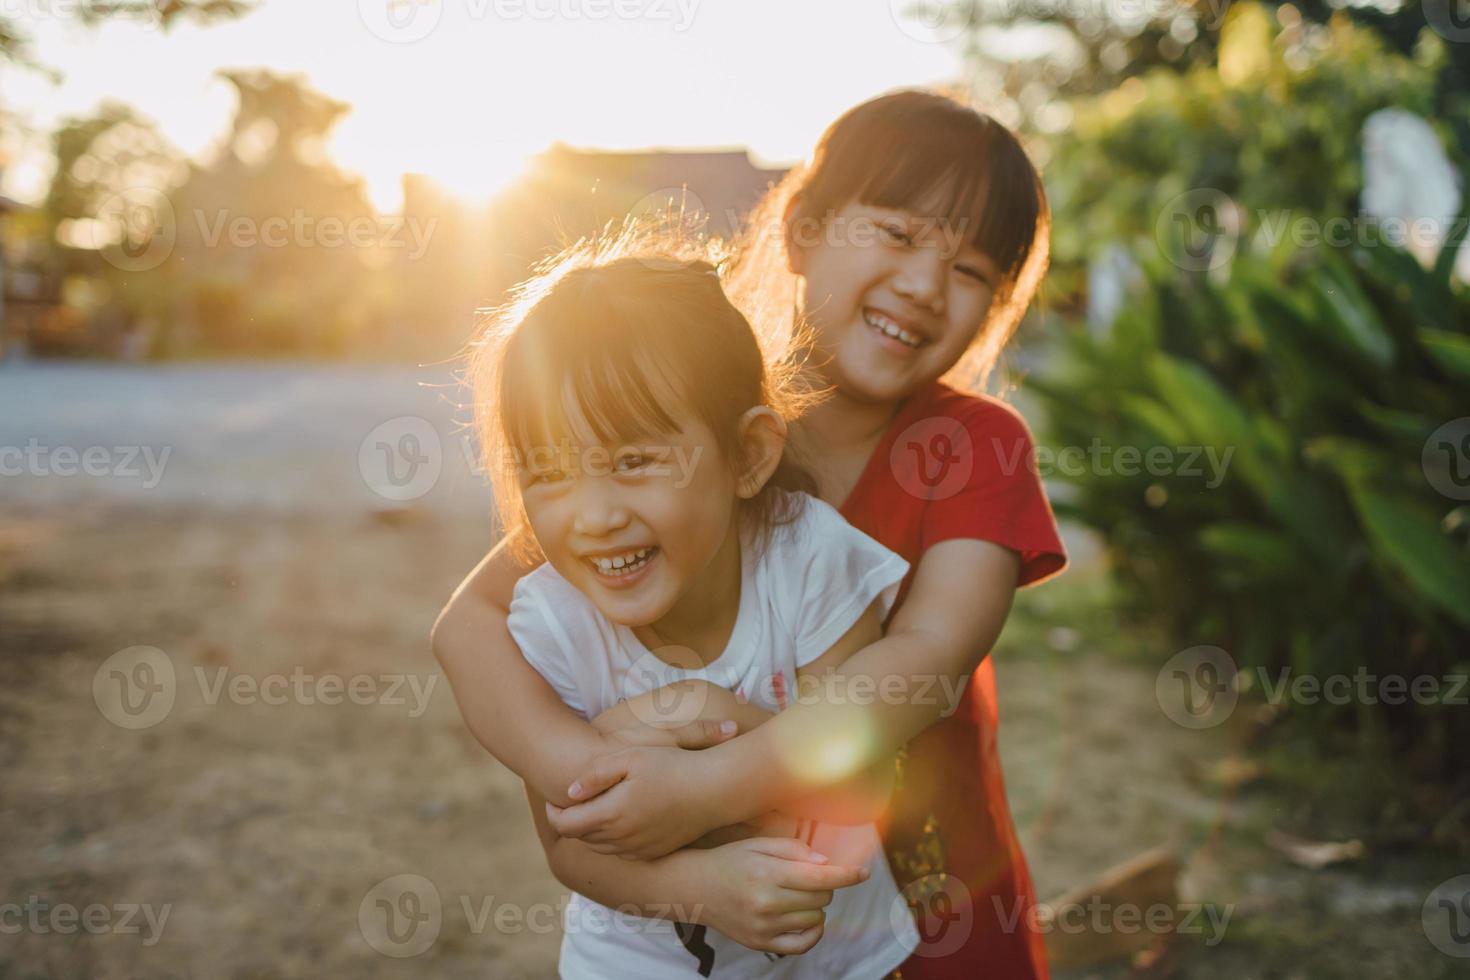 People portrait of an emotional face expression of smiling and laughing of 6 year old Asian sibling kids. Family healthy and happiness children playing together concept photo